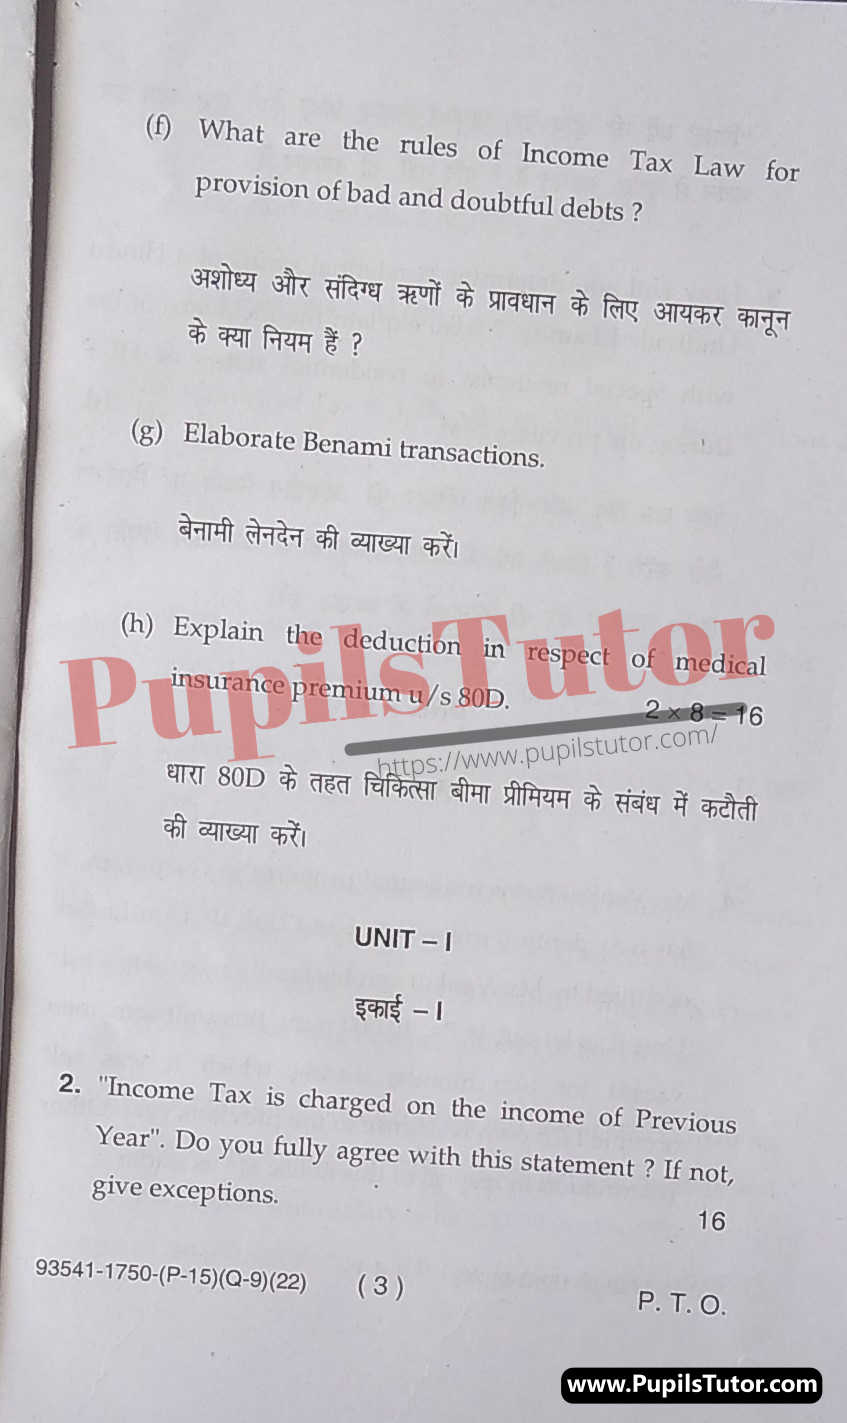 Free Download PDF Of M.D. University B.Com. (Hons.) 5th Semester Latest Question Paper For Income Tax Subject (Page 3) - https://www.pupilstutor.com